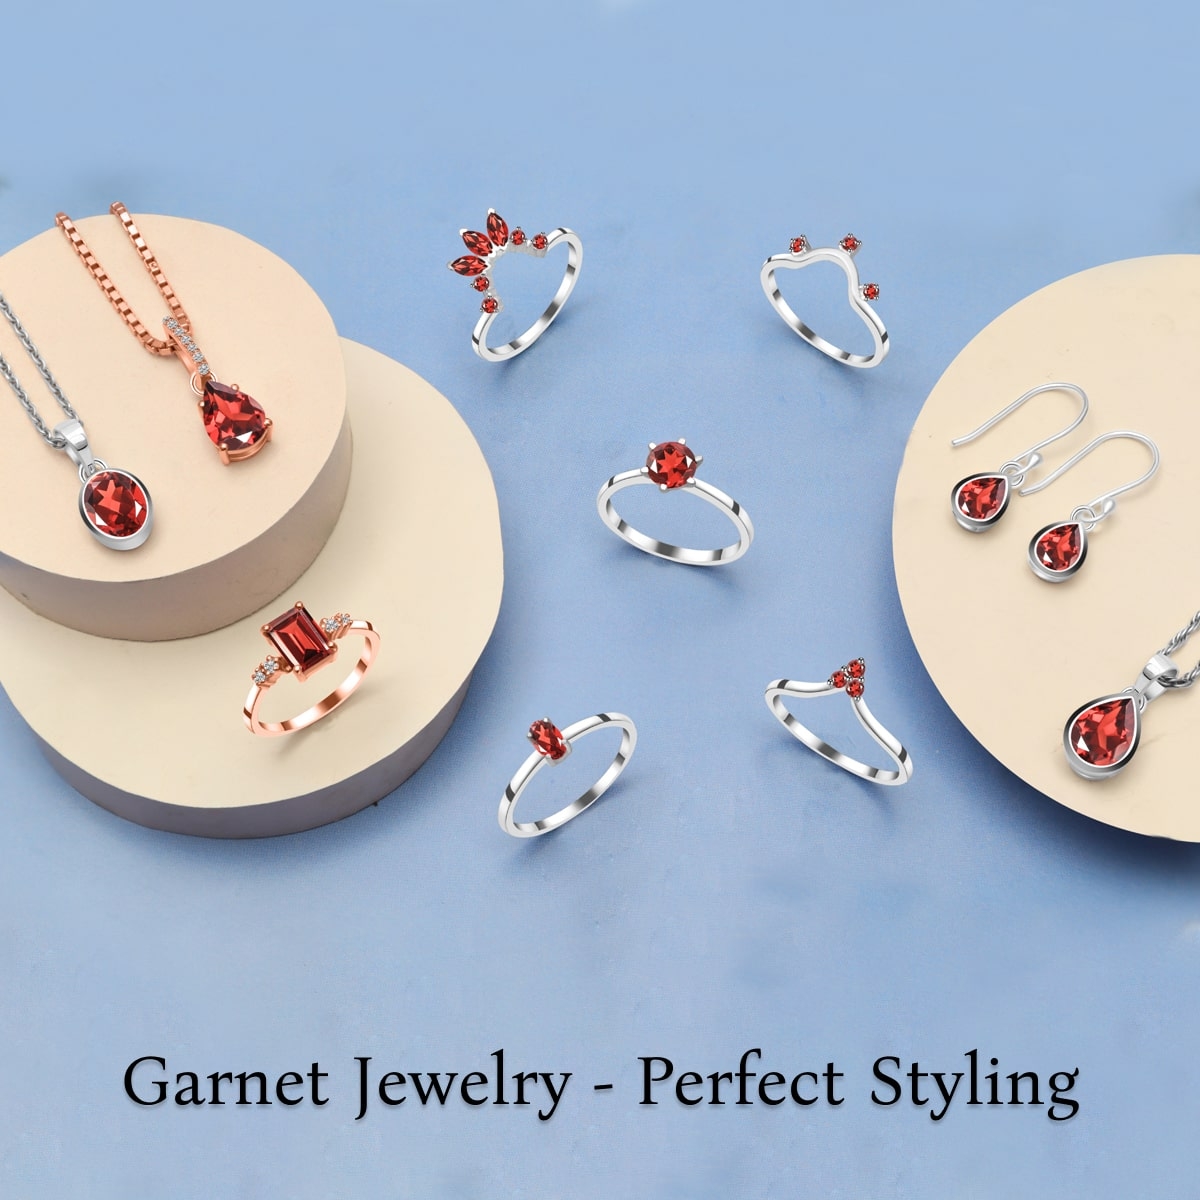 Styling and Adorning Garnet Jewelry